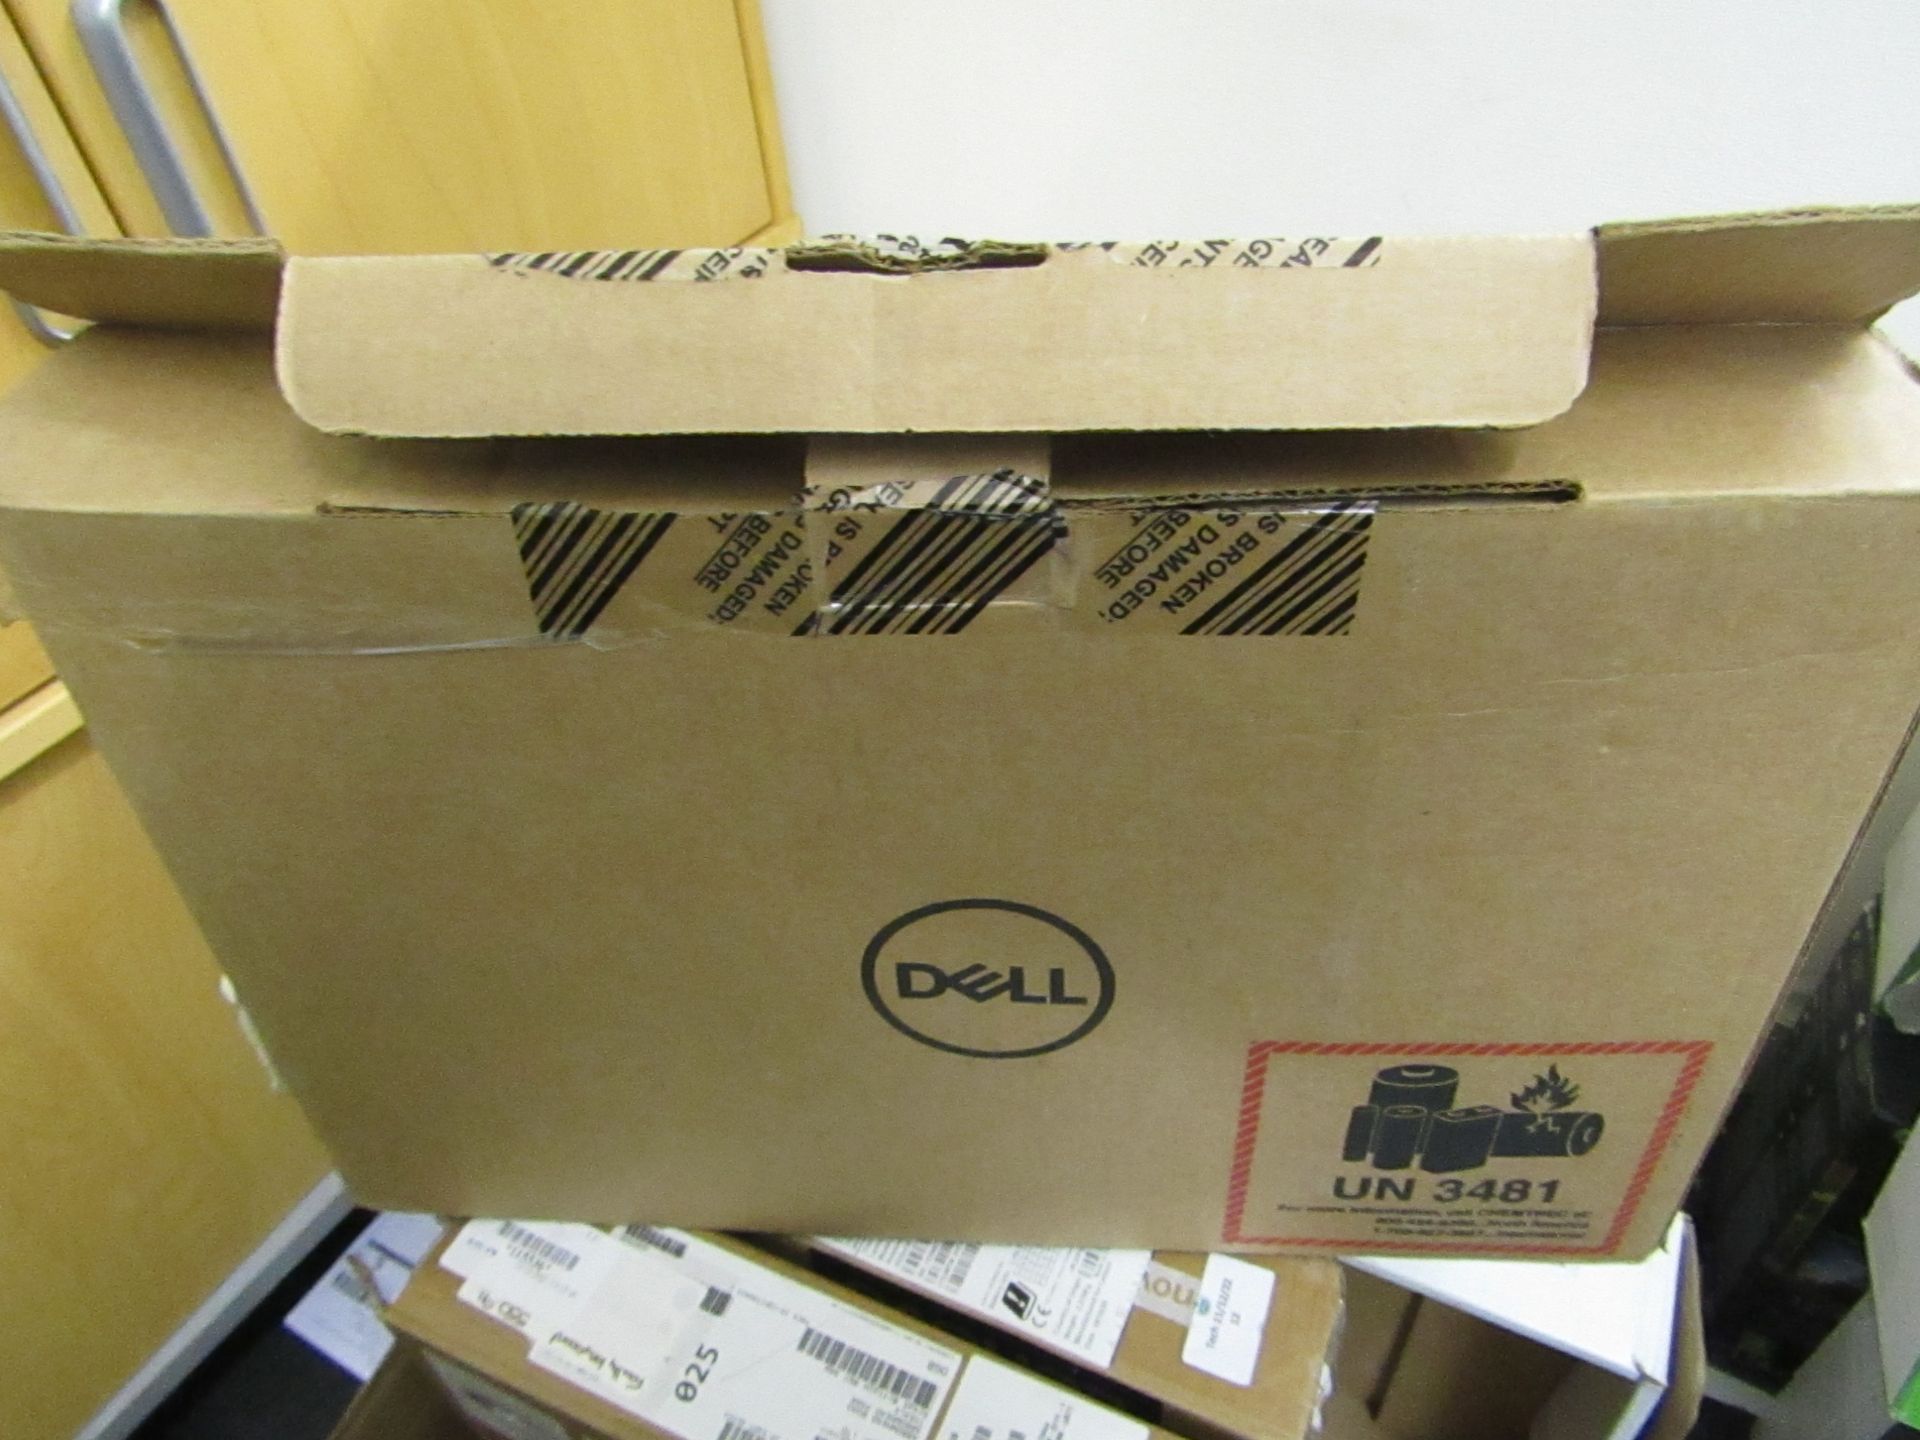 Dell latitude 7280 laptop, powers on and loads through to the home screen, comes in originalbox with - Image 3 of 3